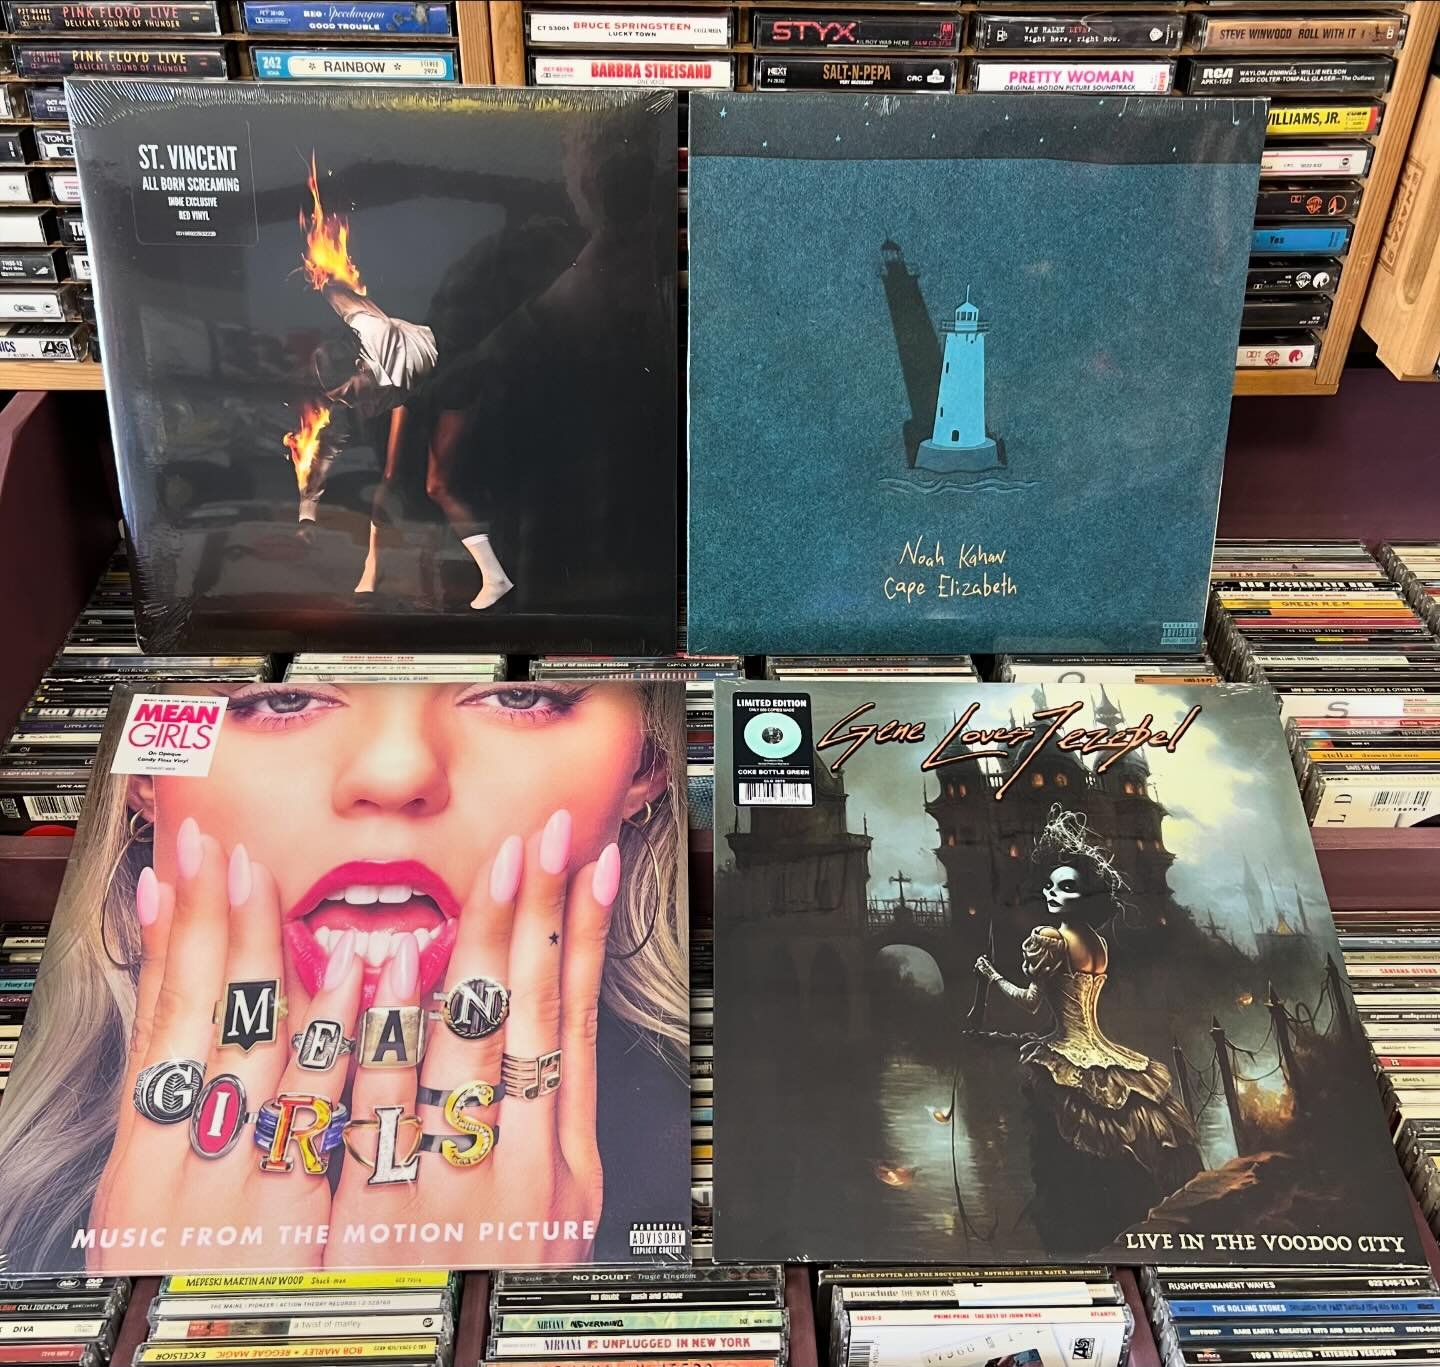 Some of today&rsquo;s new arrivals - here till 7pm tonight. #neilyoungandcrazyhorse #billyidol #meangirls #noahkahan #genelovesjezebel #stvincent #defleppard #pearljam #indierecordstore #localrecordstore #shopsmall #supportsmallbusiness